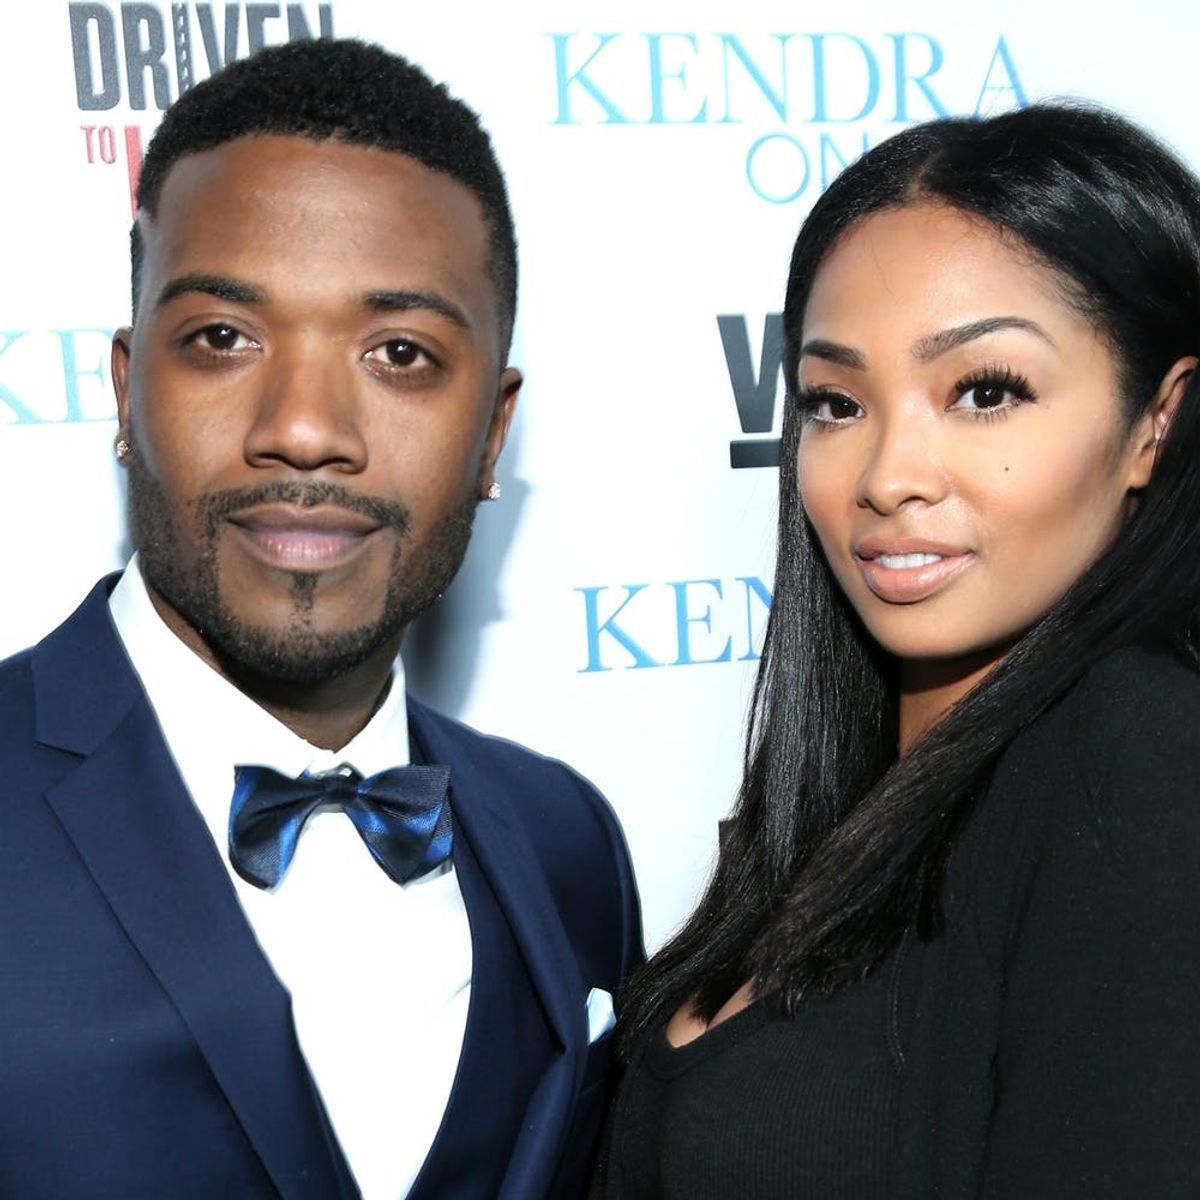 You Have to See the Non-Traditional Headpiece Princess Love Wore for Her Wedding to Ray J